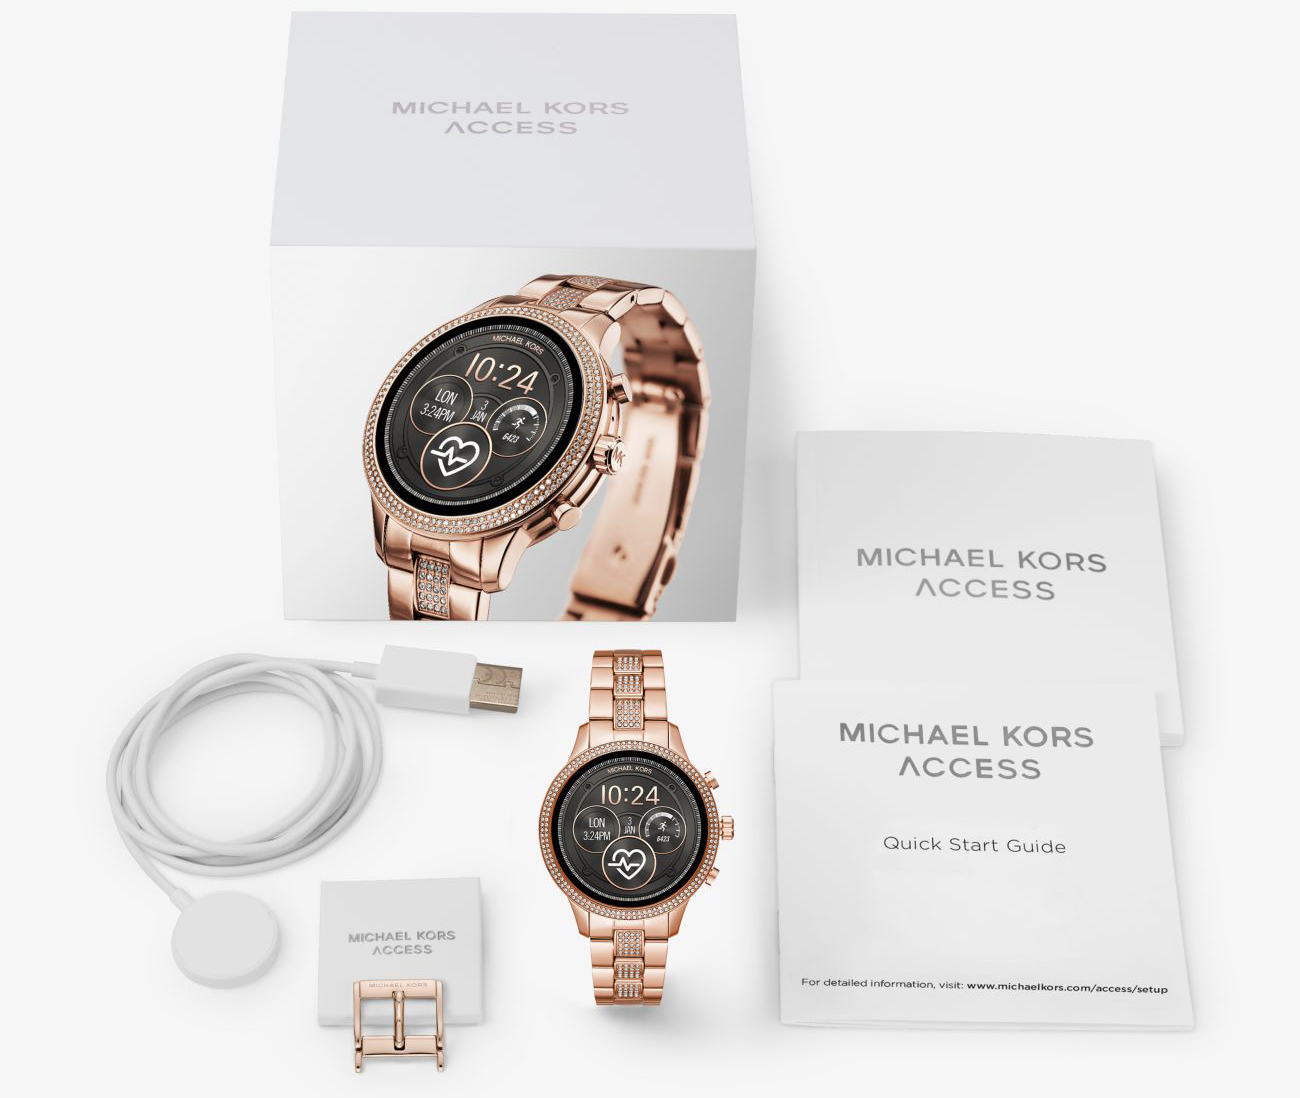 An image of a Michael Kors smartwatch along with its box and accessories.